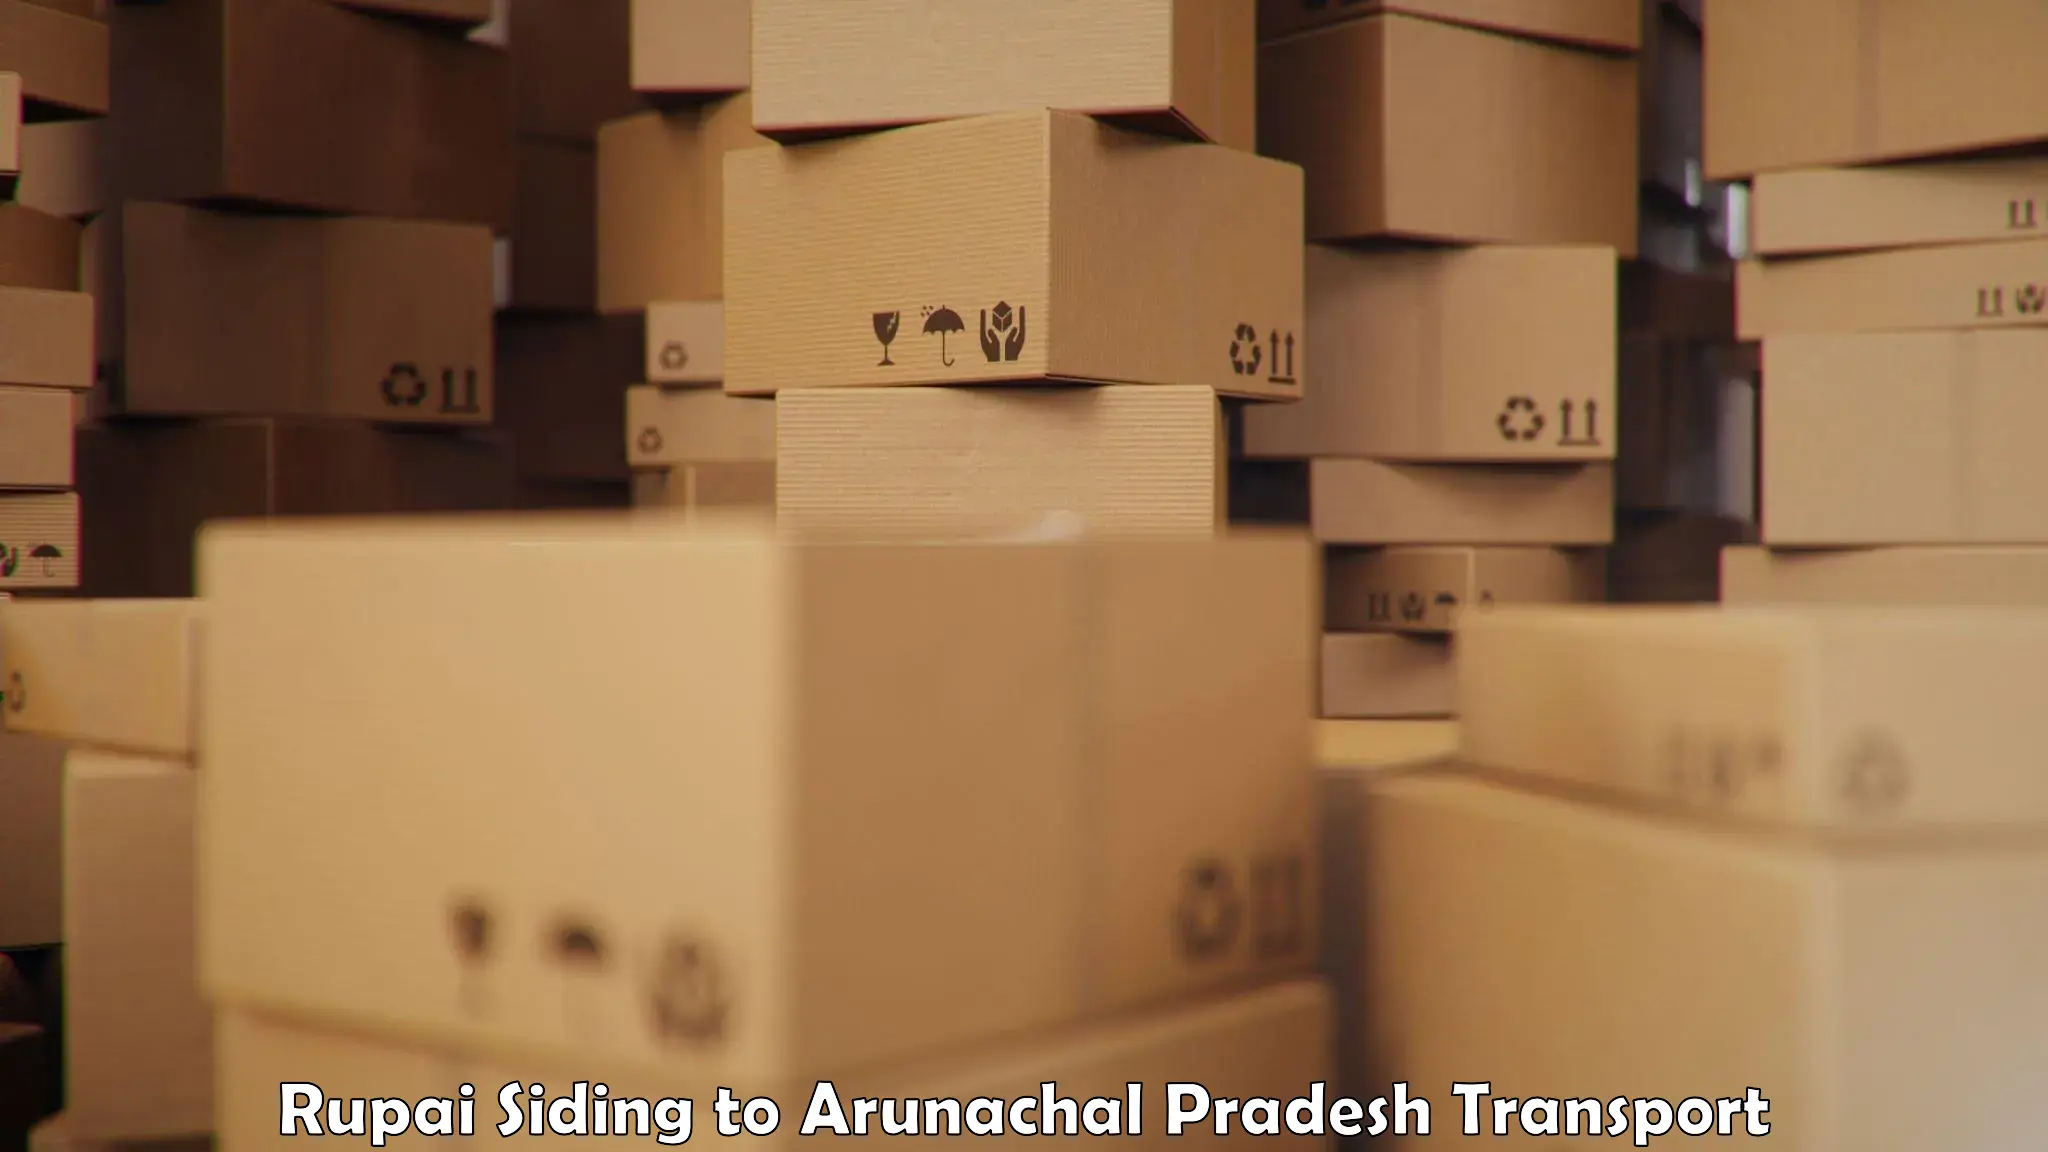 Air freight transport services Rupai Siding to Dirang